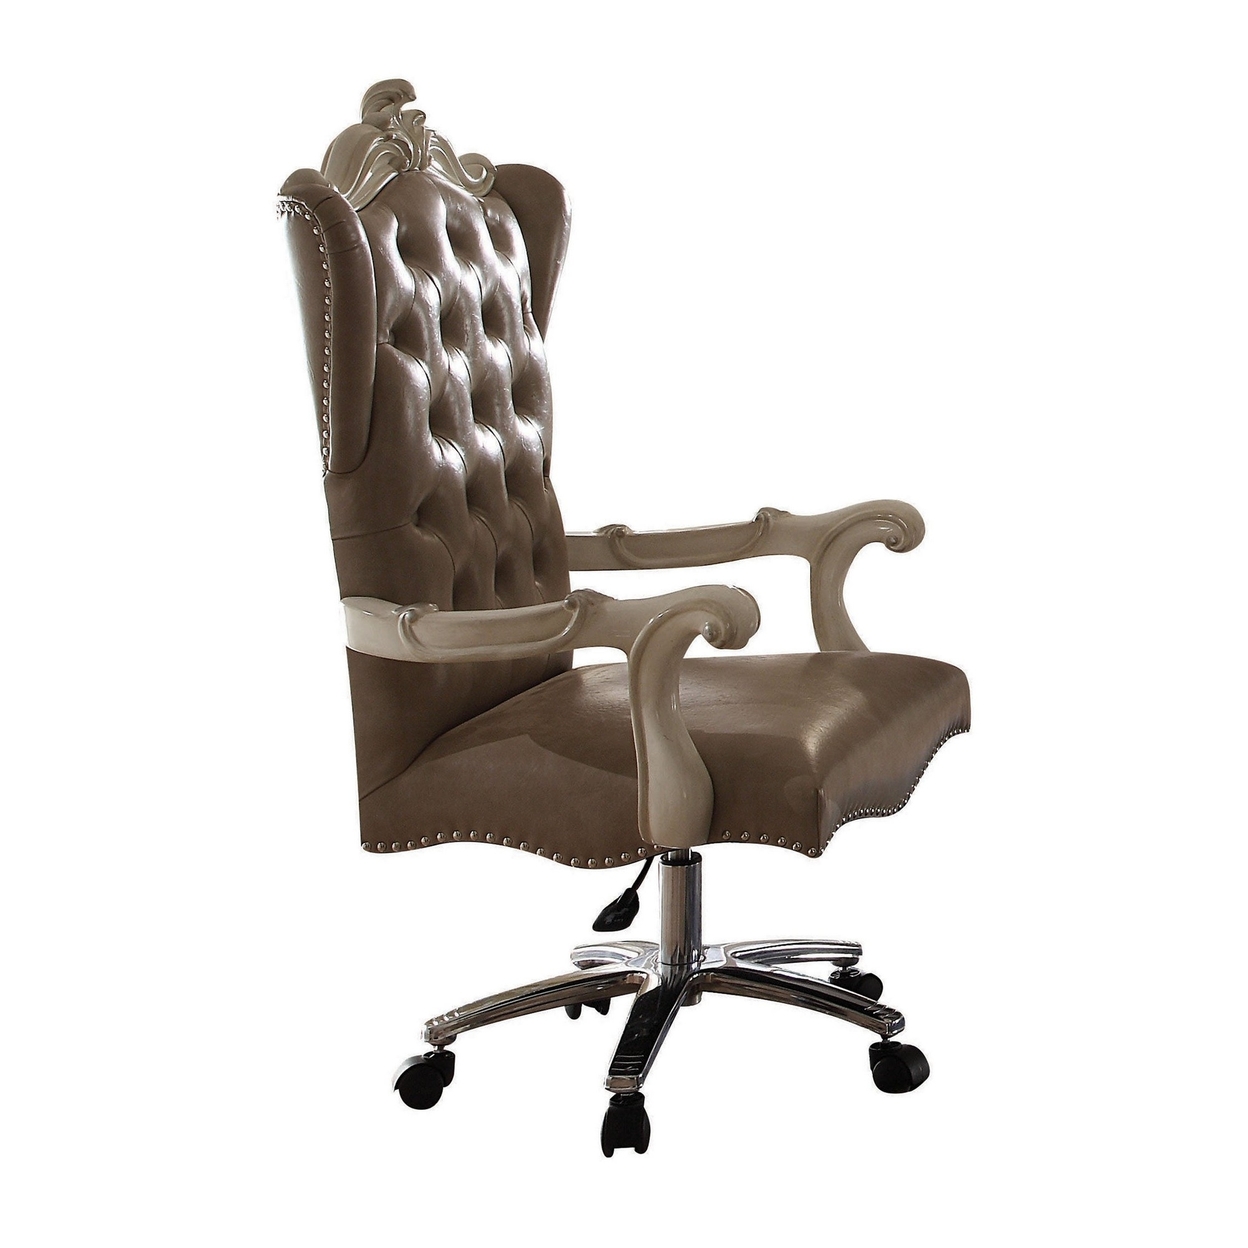 Leather Upholstered Executive Chair With Lift In Brown And Bone White Finish- Saltoro Sherpi